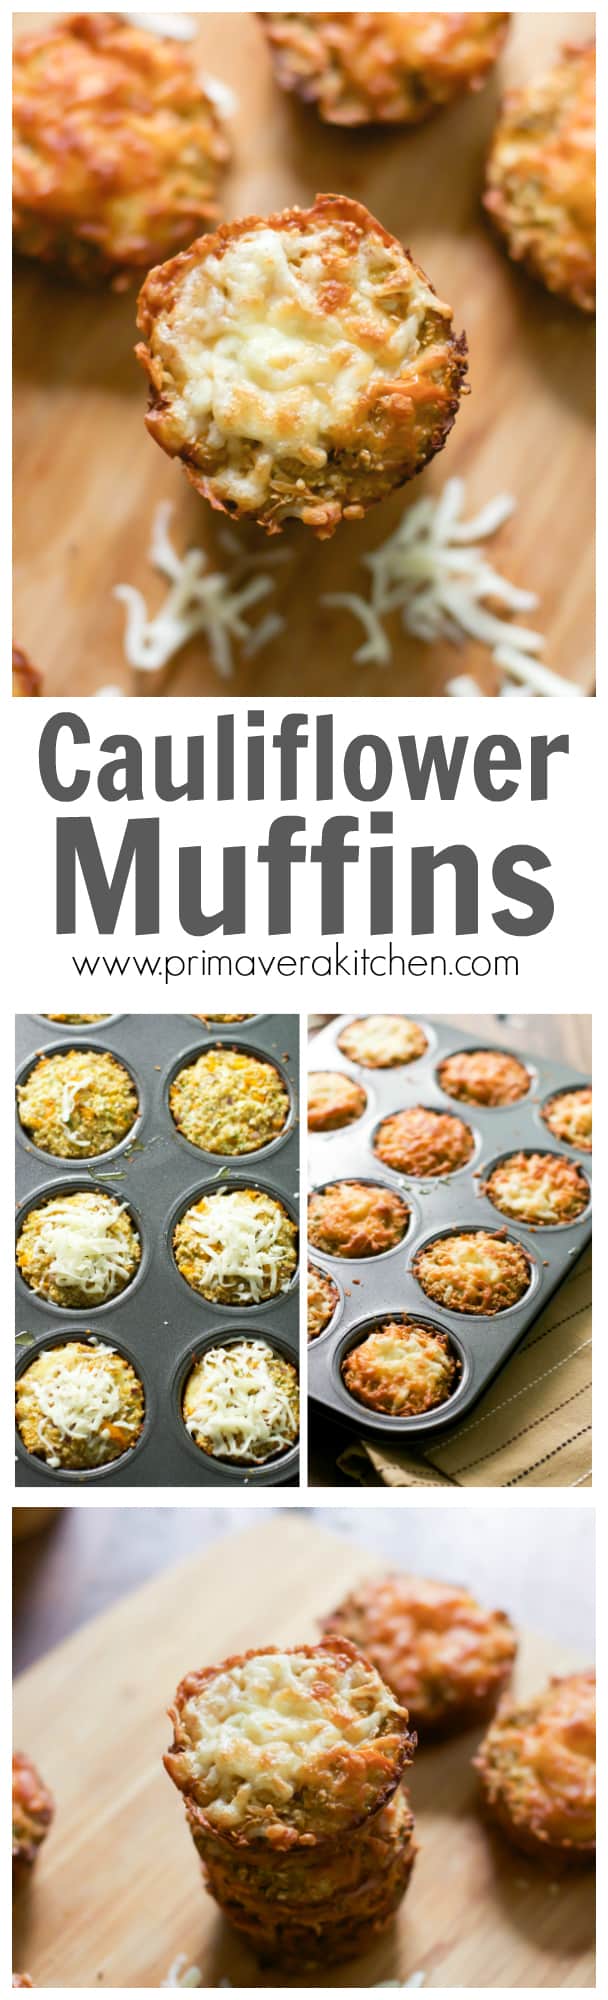 Cauliflower muffins - These Caulflower Muffins are gluten-free, low-carb and high in fiber. They are perfect side dish, appetizer or even a delicious on-the-go quick snack!!